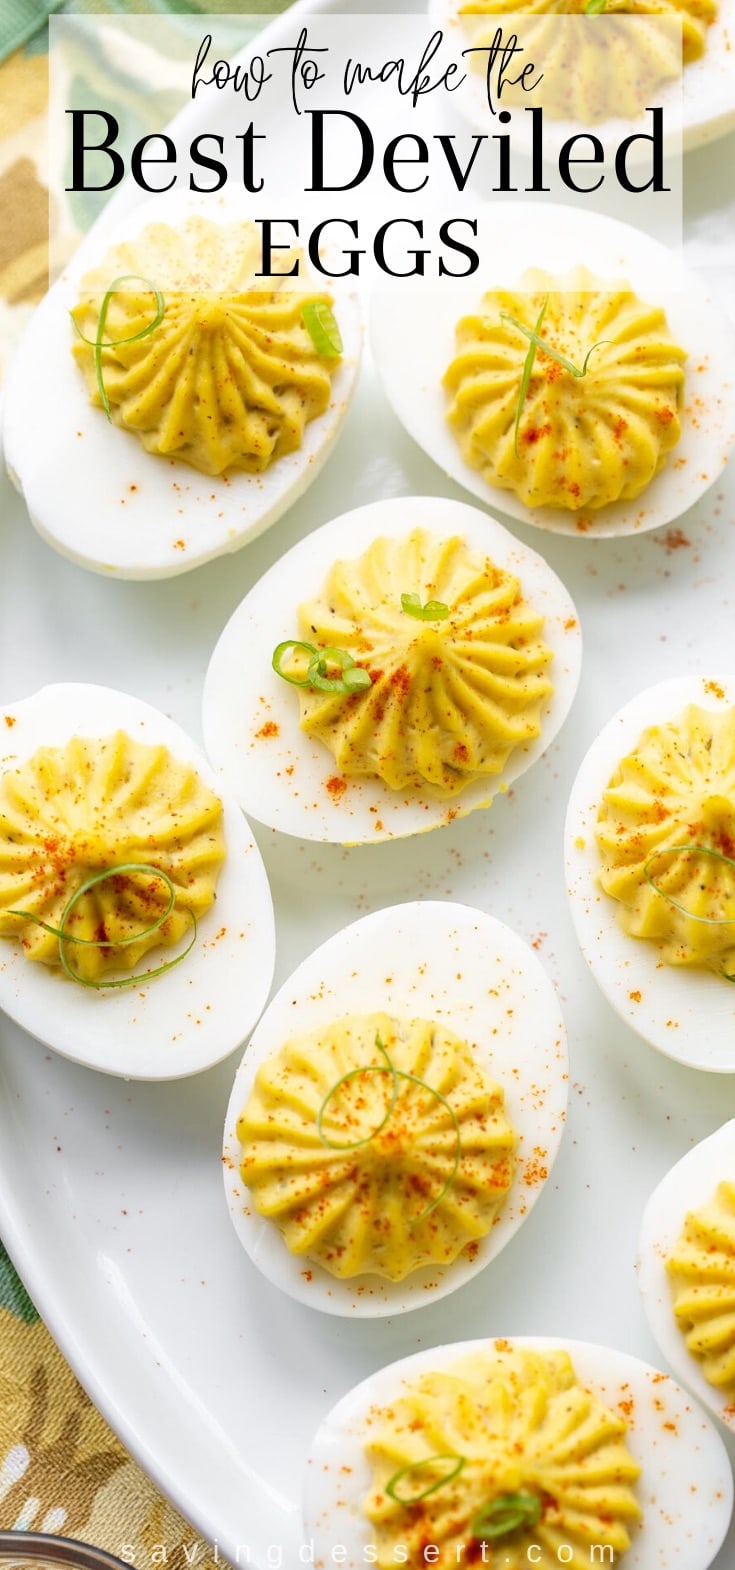 a platter of deviled eggs garnished with paprika and thin sliced green onions